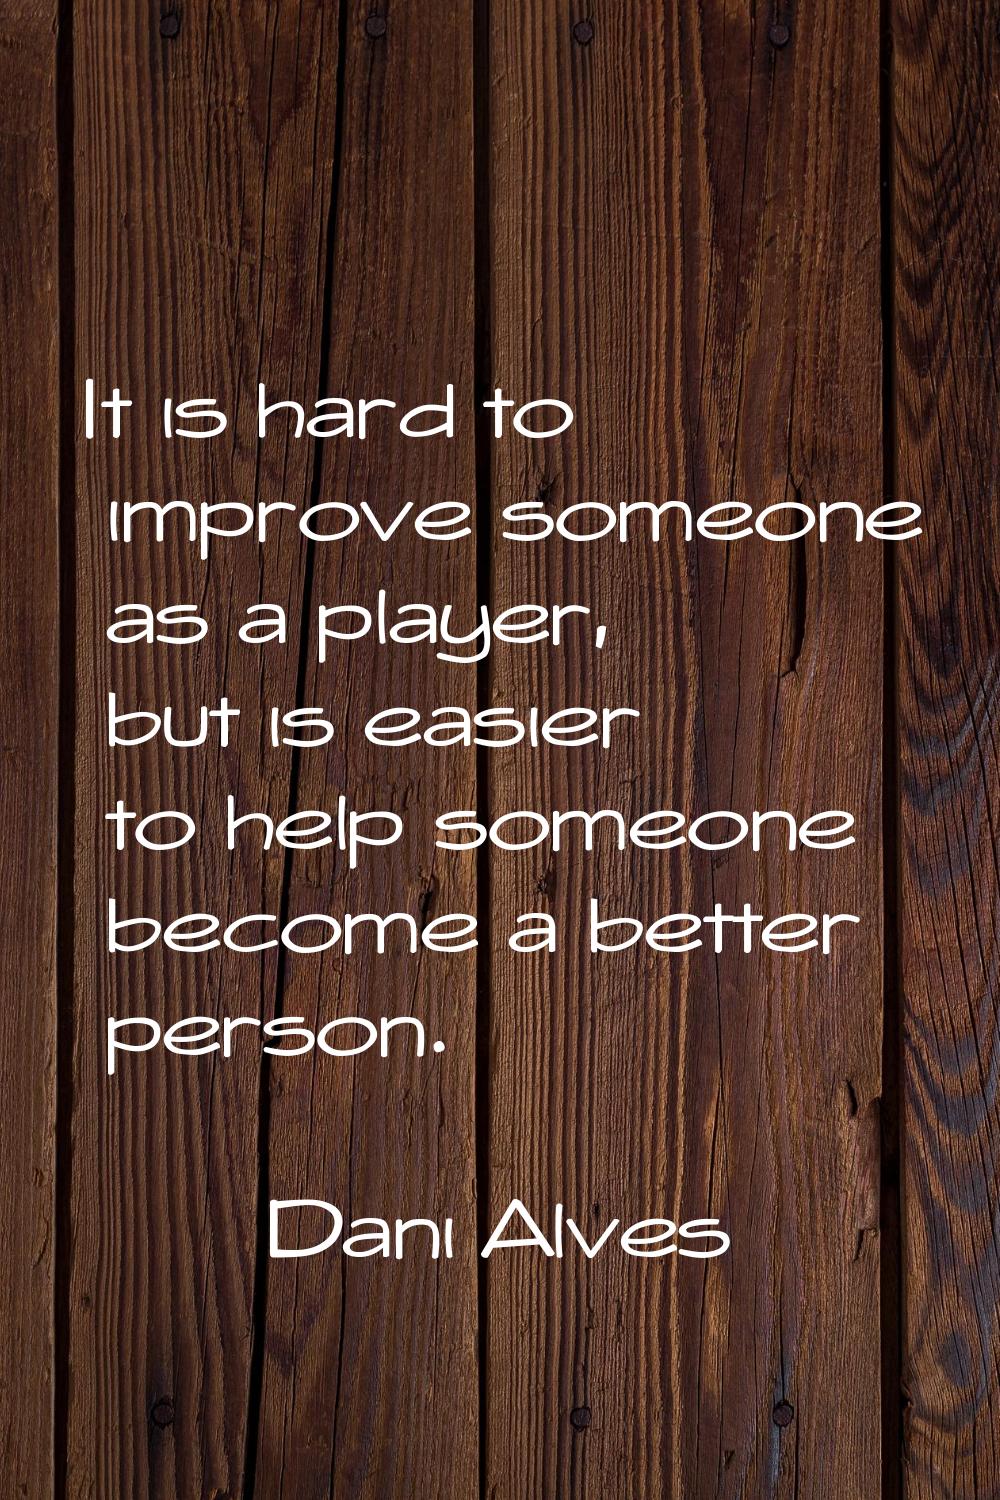 It is hard to improve someone as a player, but is easier to help someone become a better person.